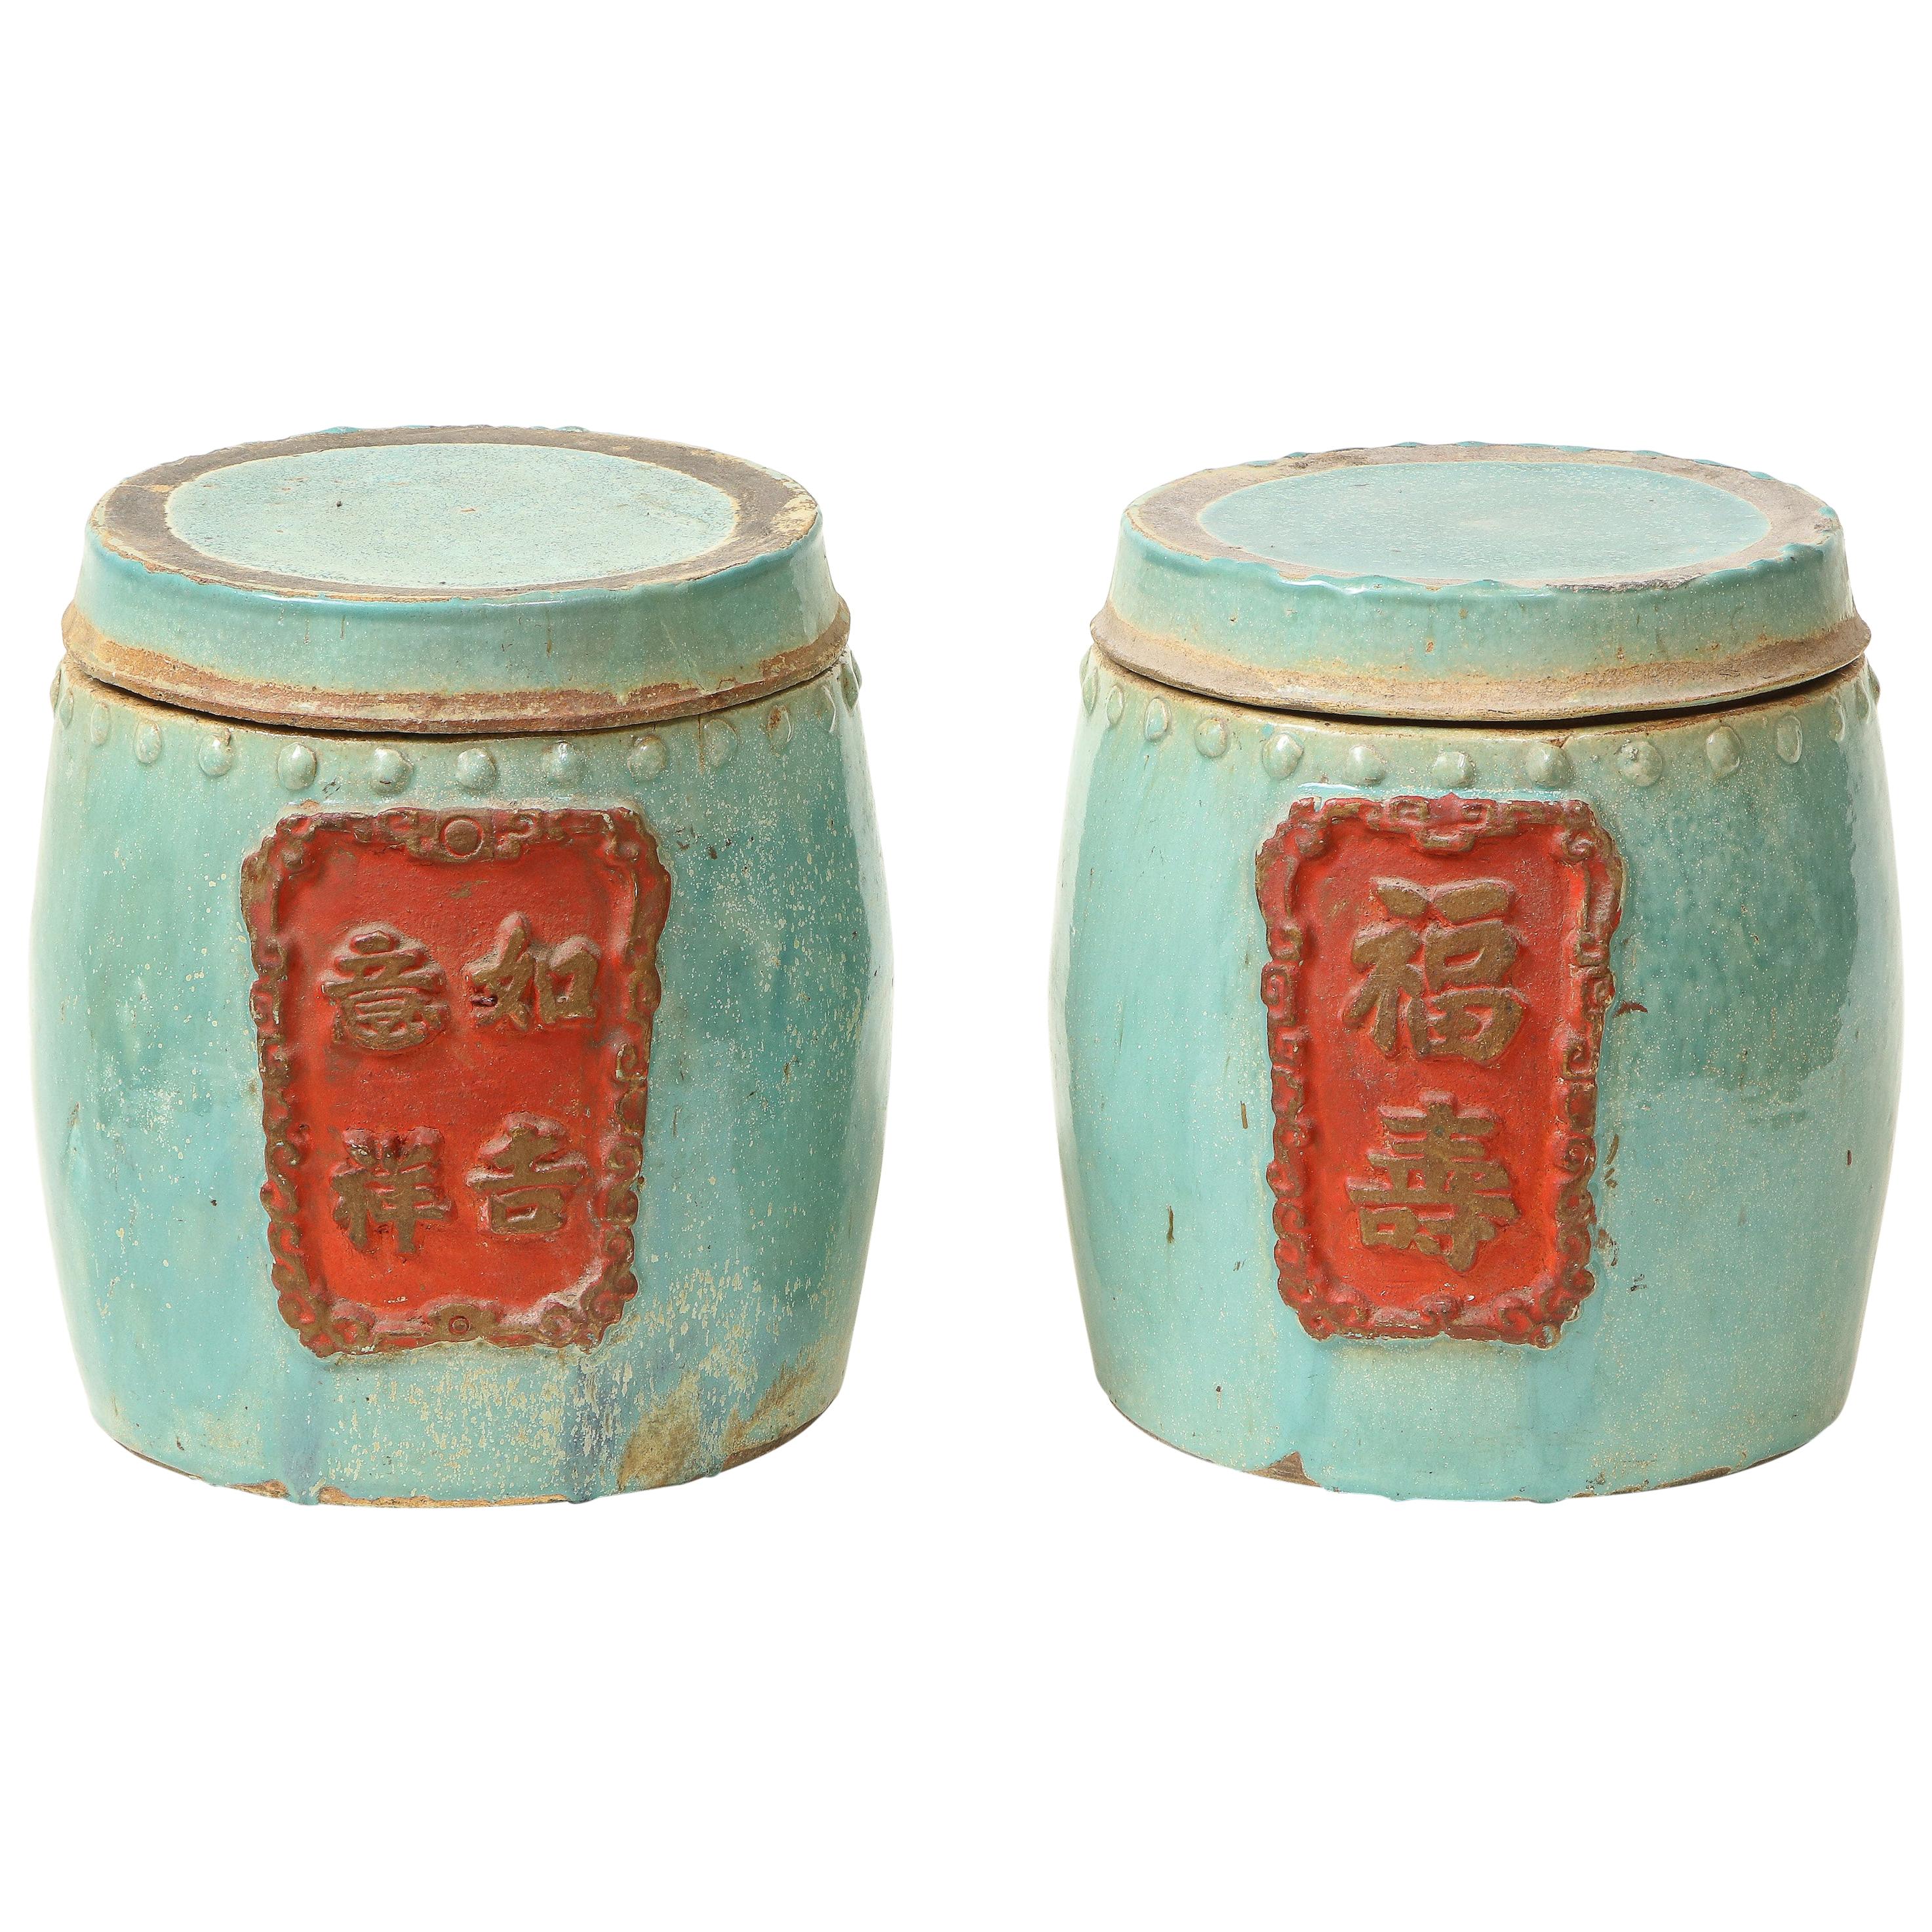 Pair of Chinese Turquoise and Red Lidded Canisters